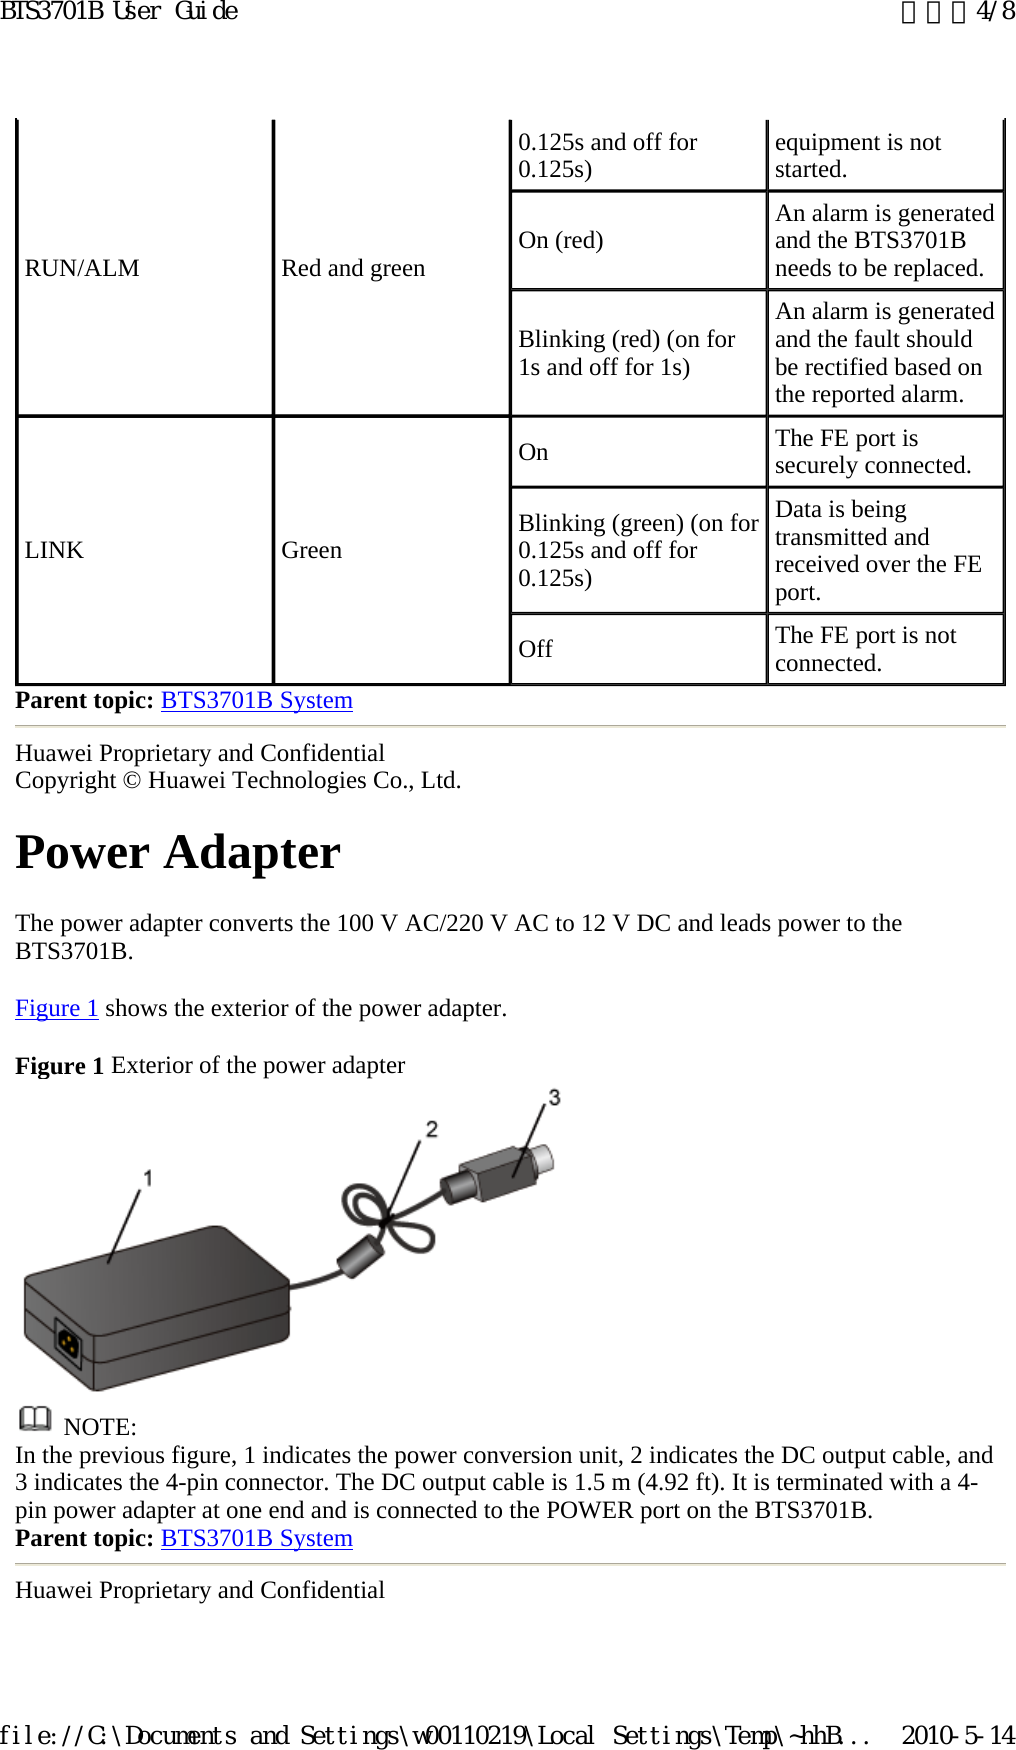 Parent topic: BTS3701B System Huawei Proprietary and Confidential Copyright © Huawei Technologies Co., Ltd. Power Adapter  The power adapter converts the 100 V AC/220 V AC to 12 V DC and leads power to the BTS3701B.  Figure 1 shows the exterior of the power adapter.  Figure 1 Exterior of the power adapter    NOTE: In the previous figure, 1 indicates the power conversion unit, 2 indicates the DC output cable, and 3 indicates the 4-pin connector. The DC output cable is 1.5 m (4.92 ft). It is terminated with a 4-pin power adapter at one end and is connected to the POWER port on the BTS3701B.  Parent topic: BTS3701B System Huawei Proprietary and Confidential RUN/ALM  Red and green  0.125s and off for 0.125s)   equipment is not started.  On (red)   An alarm is generated and the BTS3701B needs to be replaced.  Blinking (red) (on for 1s and off for 1s)  An alarm is generated and the fault should be rectified based on the reported alarm.  LINK Green On  The FE port is securely connected.  Blinking (green) (on for 0.125s and off for 0.125s)  Data is being transmitted and received over the FE port.  Off   The FE port is not connected.  页码，4/8BTS3701B User Guide2010-5-14file://C:\Documents and Settings\w00110219\Local Settings\Temp\~hhB...